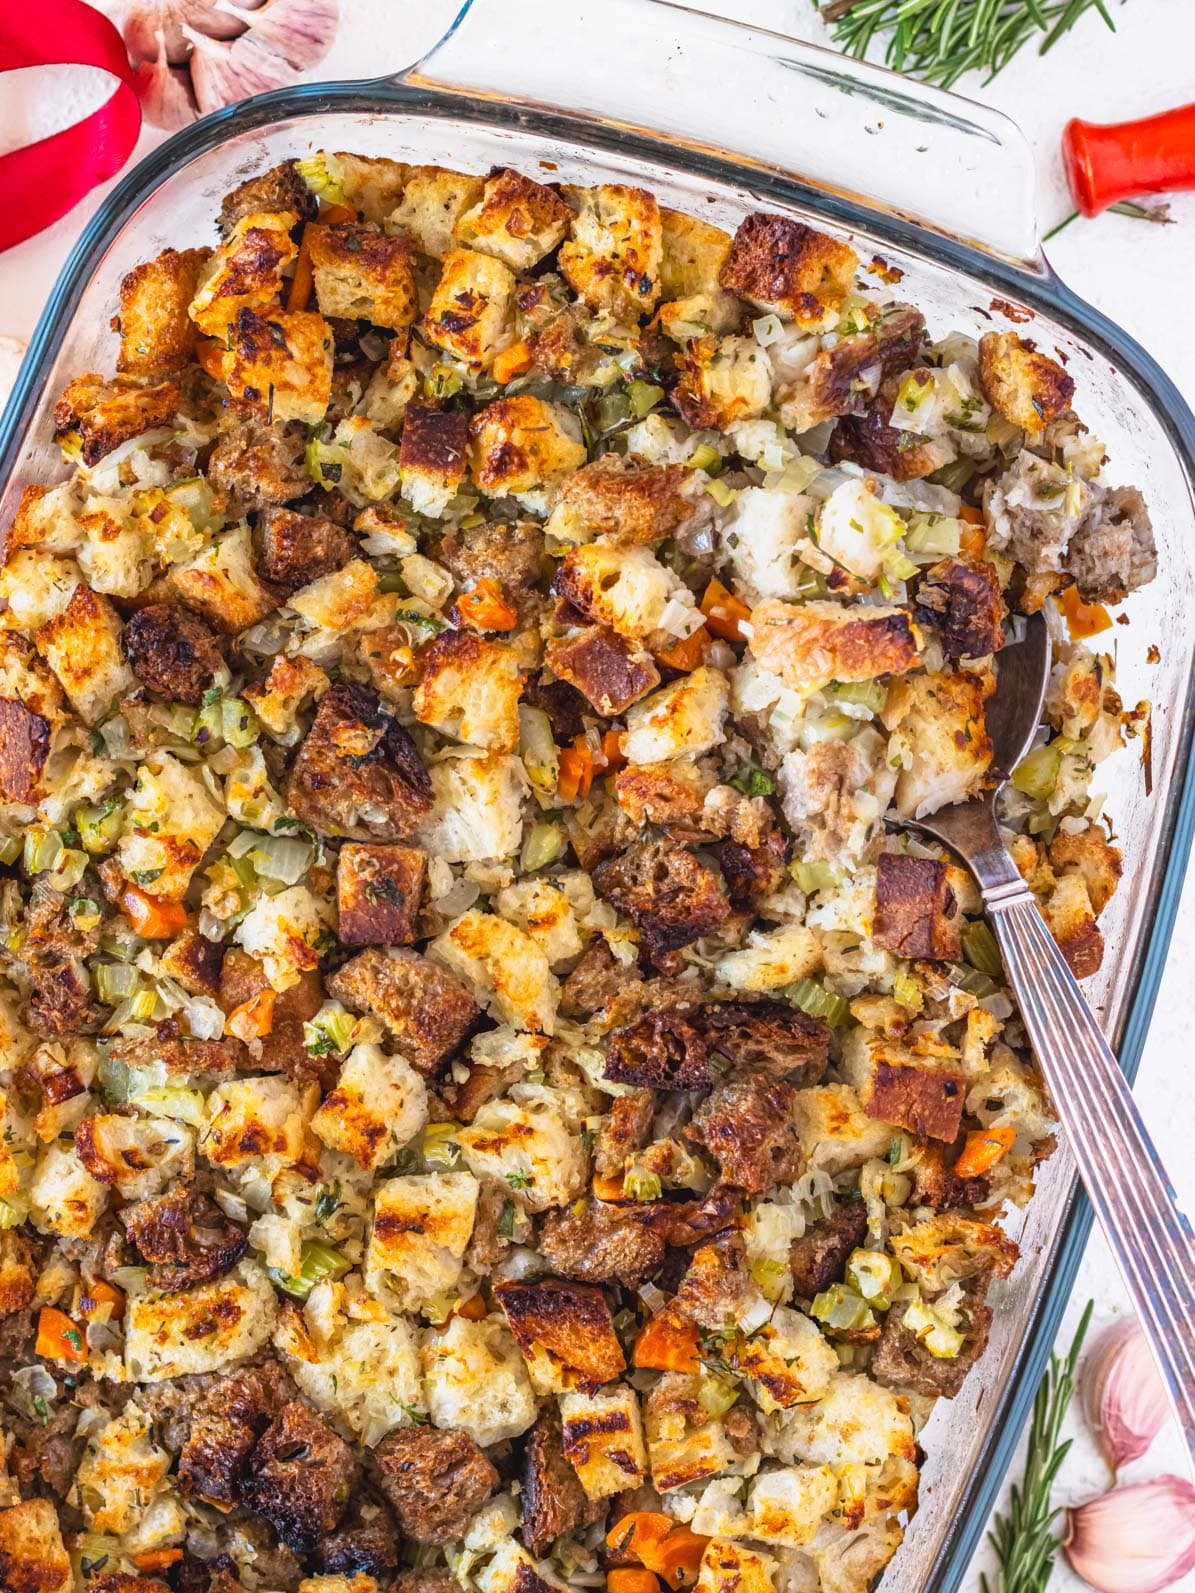 Vegetarian stuffing in a casserole with silver spoon